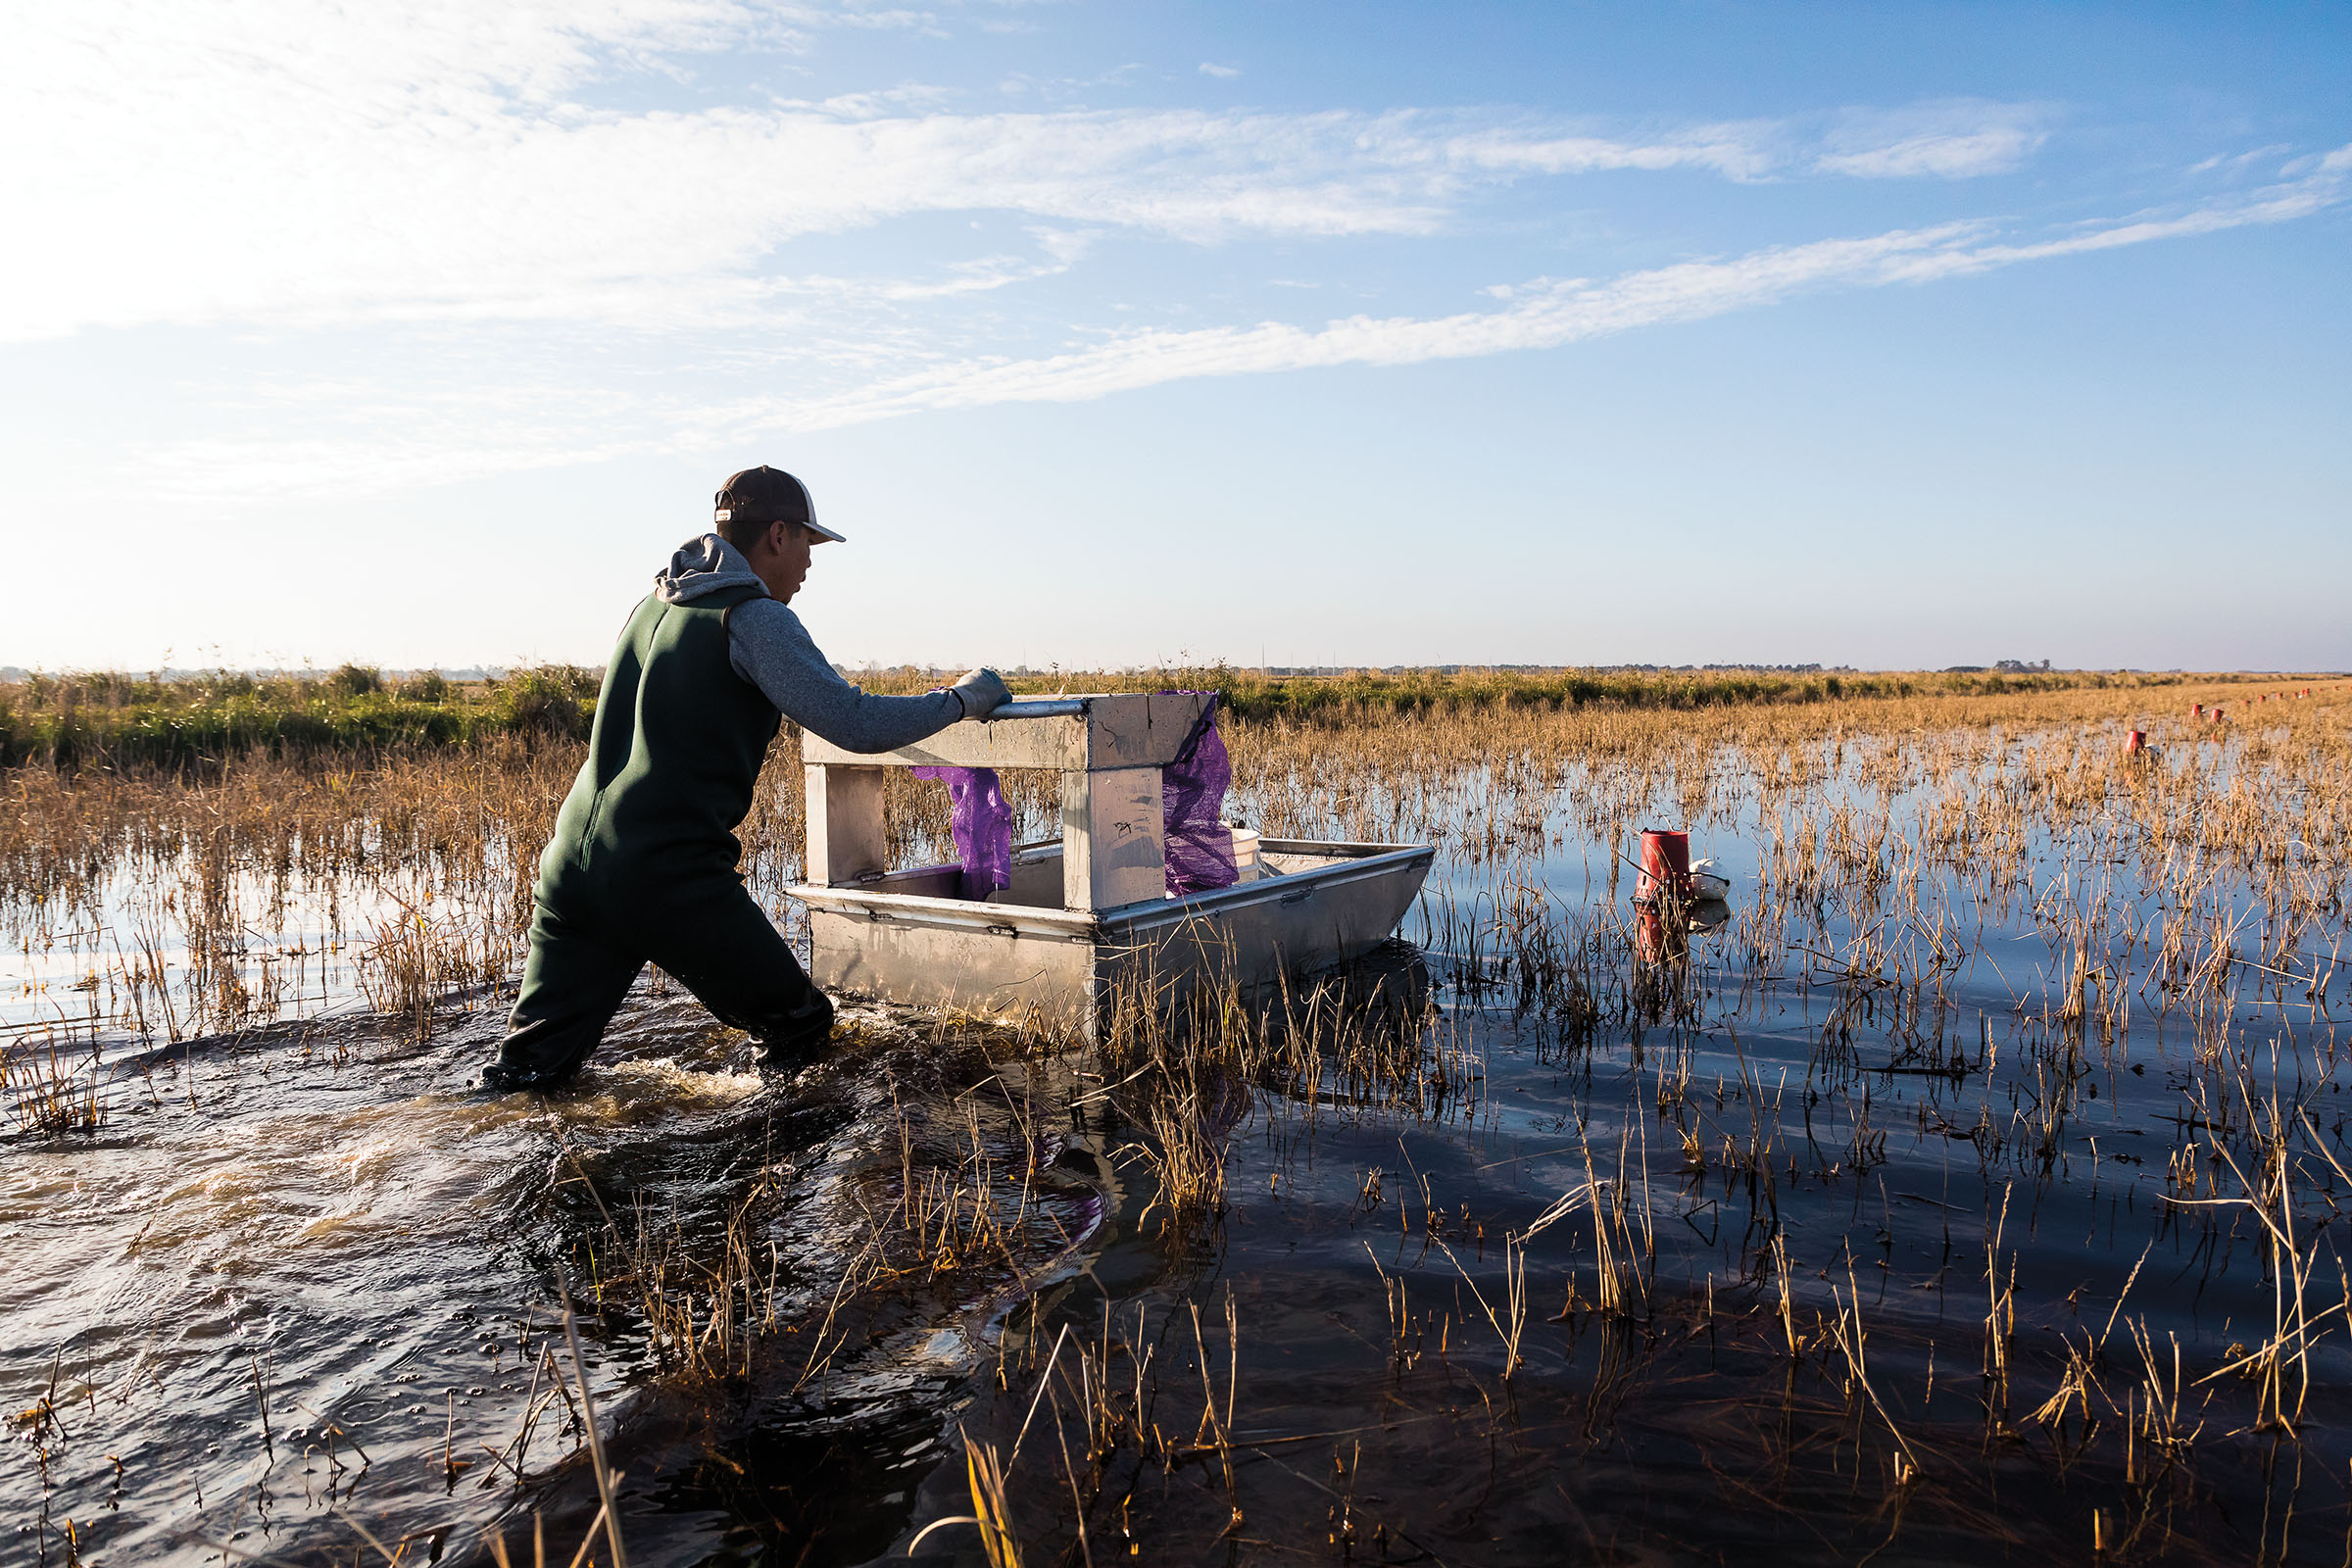 A man in a wetsuit pushes a small boat through a marsh filled with water and reeds